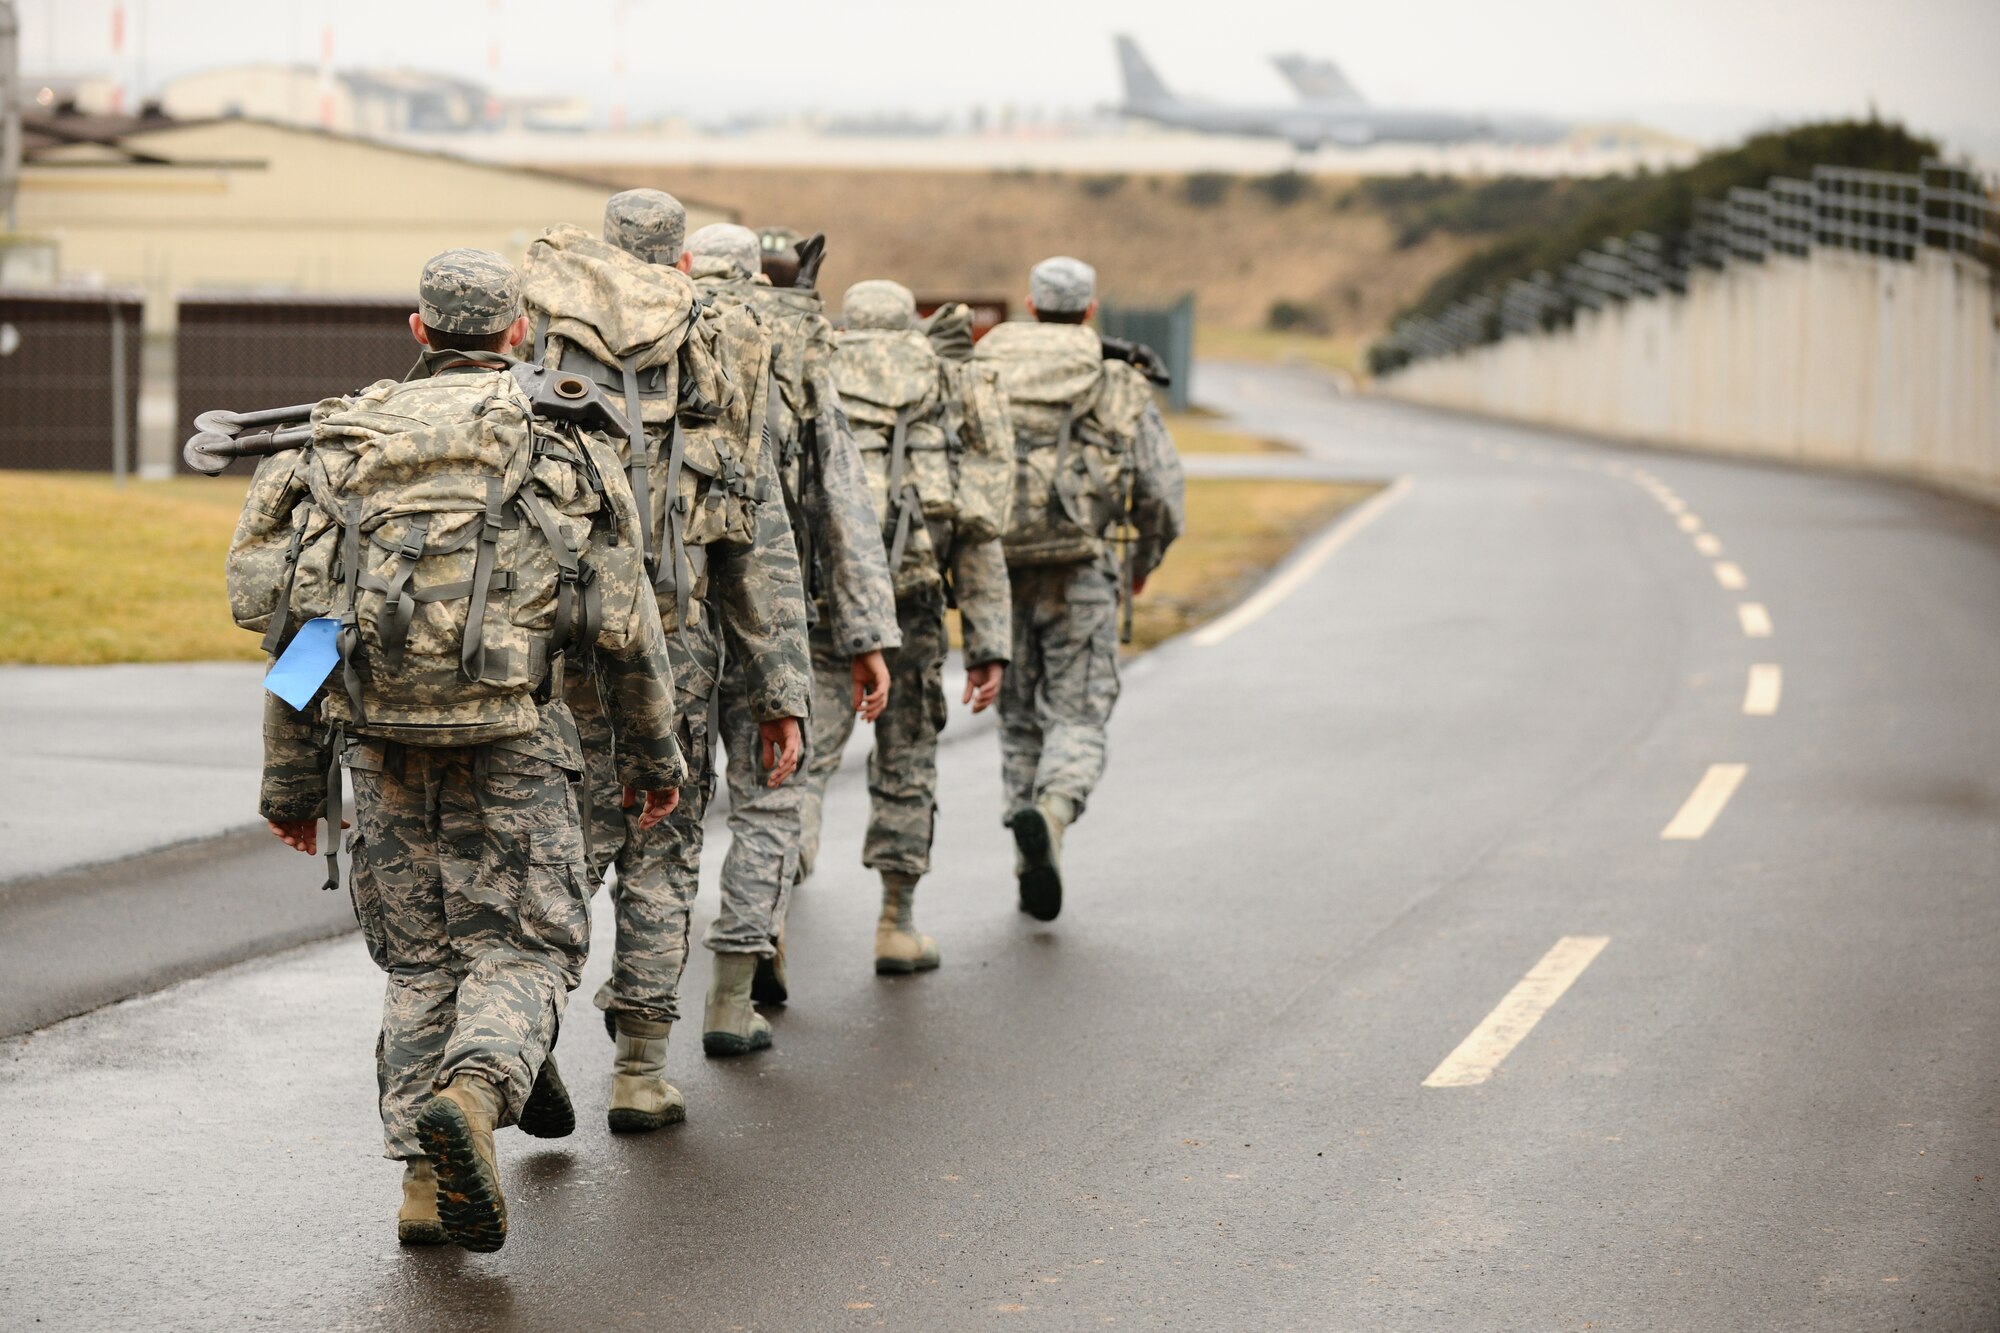 SPANGDAHLEM AIR BASE, Germany – Airmen assigned to Spangdahlem AB ruck march down a road outside Bldg. 630 here before they begin the bag drag portion of the Ranger training course March 2. Any male Airman can volunteer for the annual training if they are serious about becoming a U.S. Army Ranger and their chain of command allows him to participate. The required three-day course prepares Airmen for what they will be tested on during the Ranger training school at U.S. Army Fort Benning, Ga. Out of the five Airmen enrolled in the training, Senior Airman Sean Reval, 52nd Security Forces Squadron, and Senior Airman Coty Raphael, 52nd Medical Operations Squadron, were the only participants to qualify to continue on to Ranger pre-assessment training at Sembach Air Base, Germany. (U.S. Air Force photo by Airman 1st Class Dillon Davis/Released)